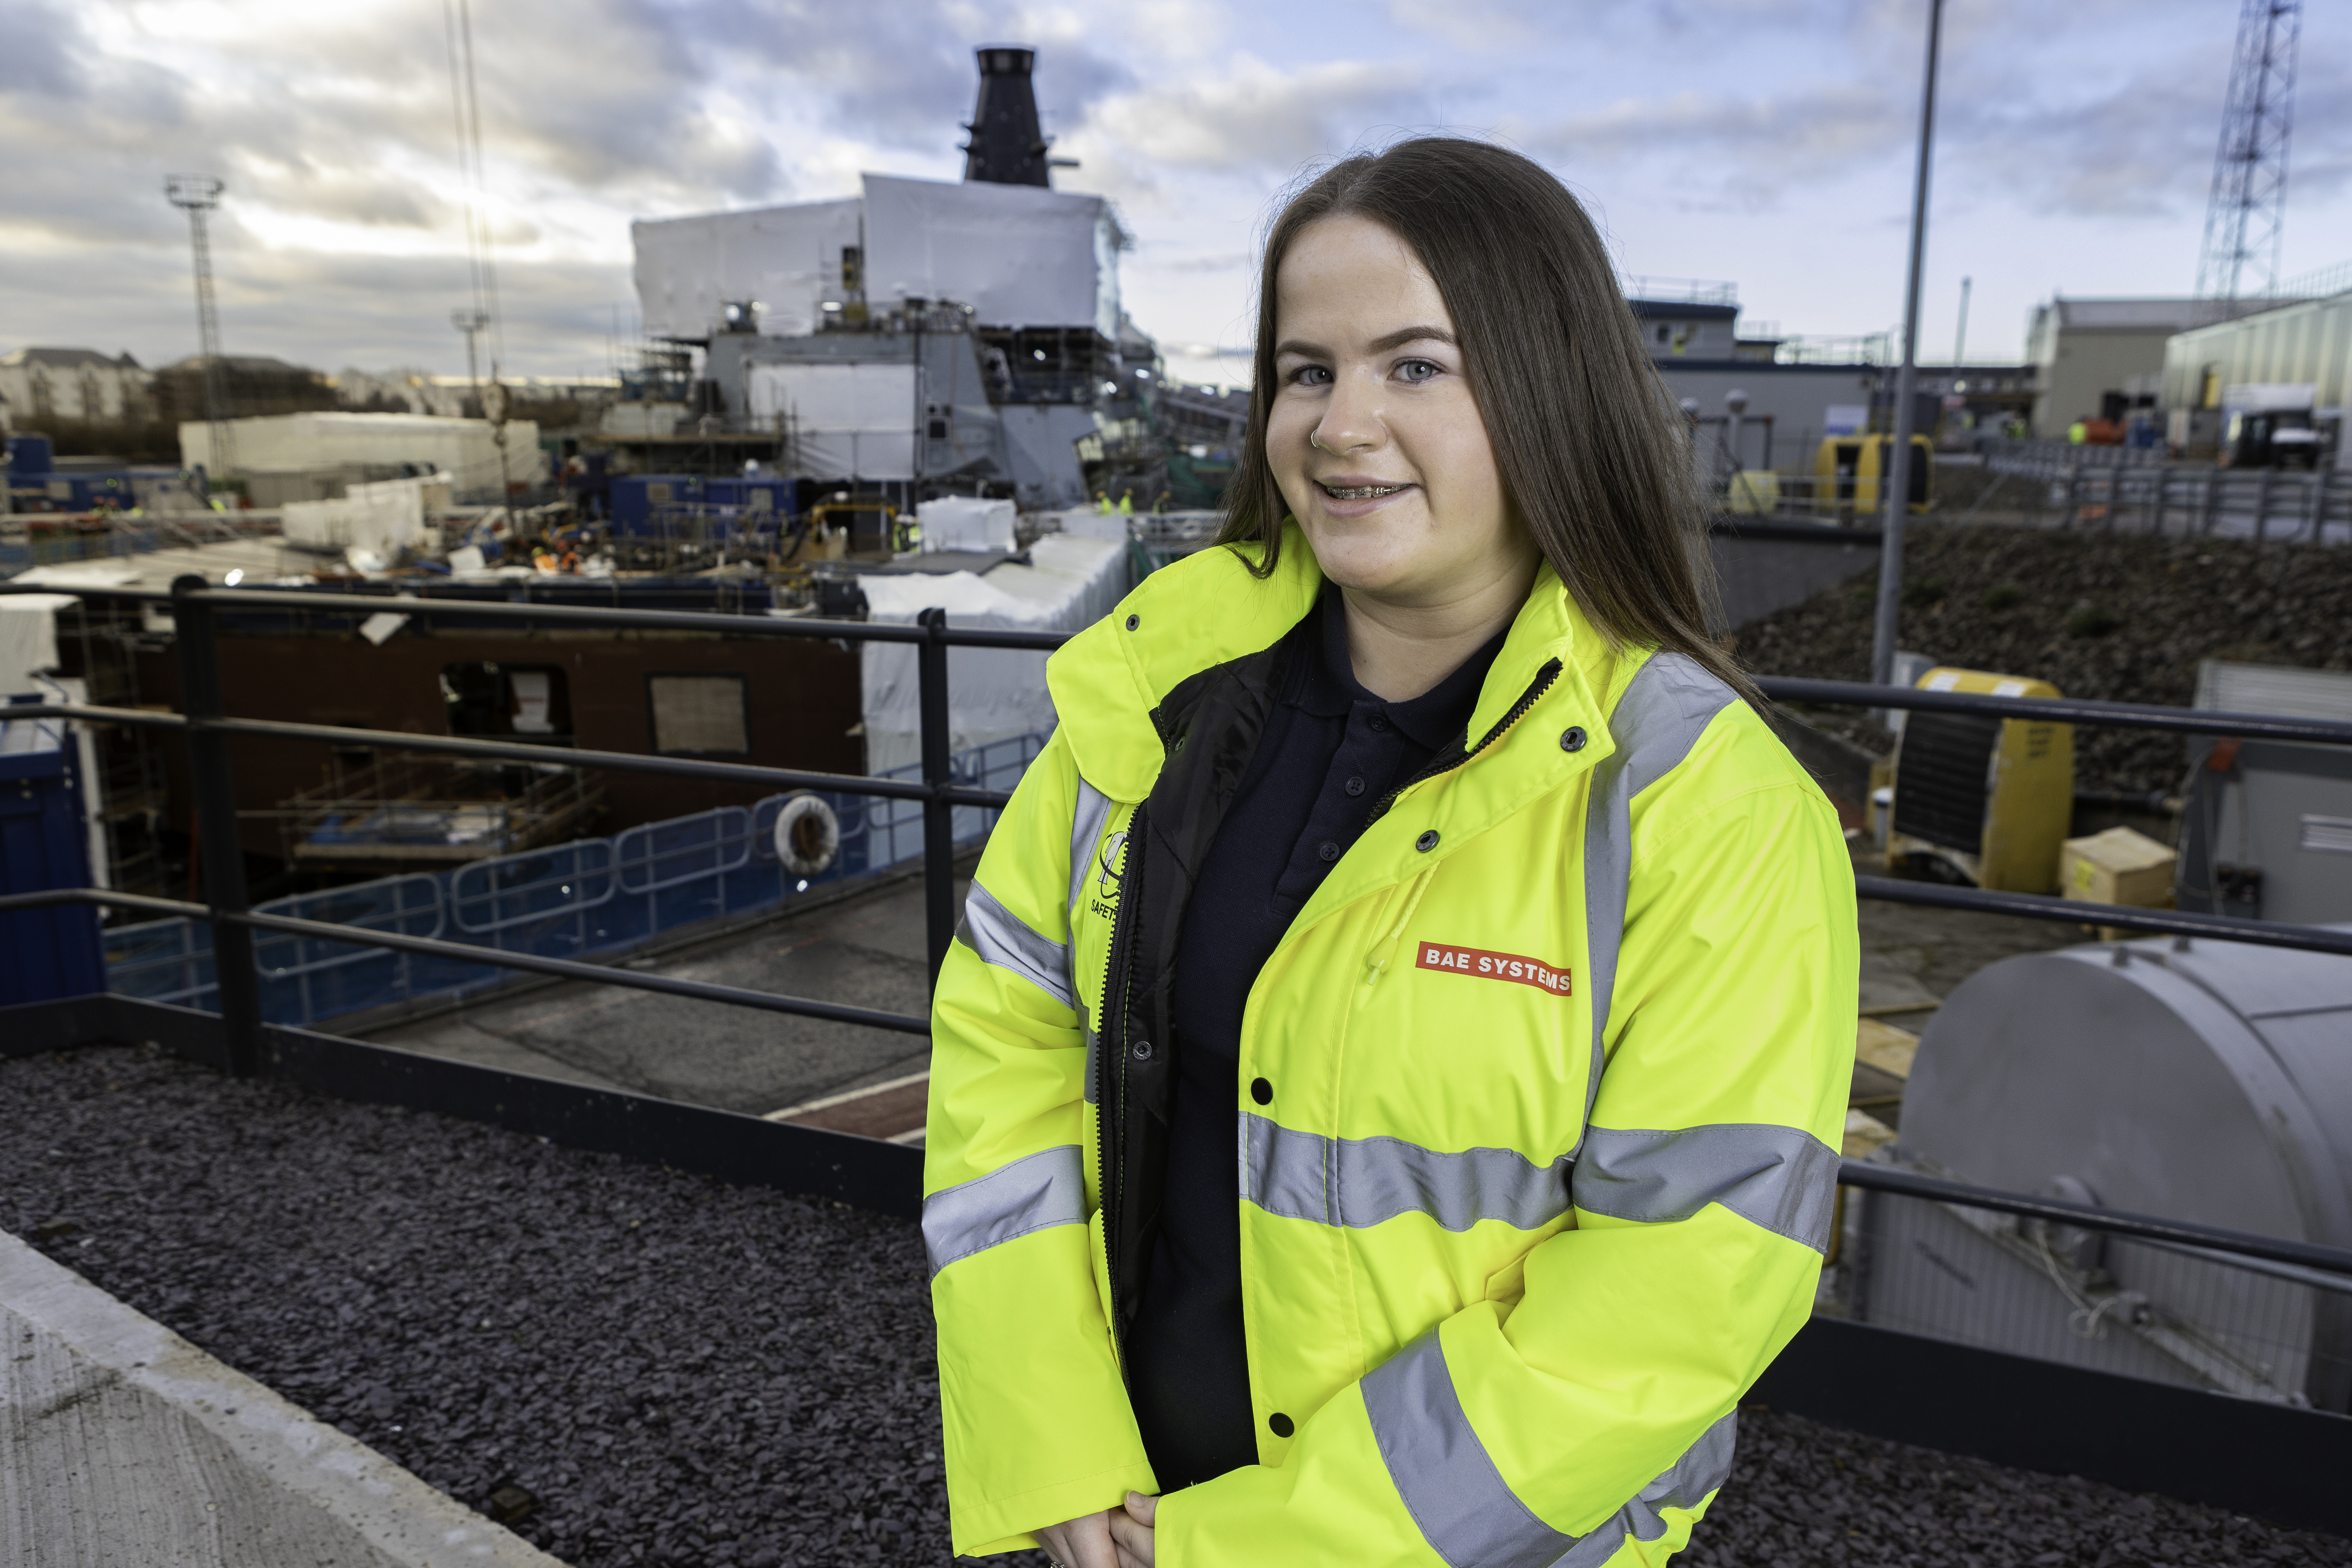 Penny stands smiling at camera, her long brown hair falling over her high vis jacket with a BAE Systems label. In the background is BAE Systems yard. 